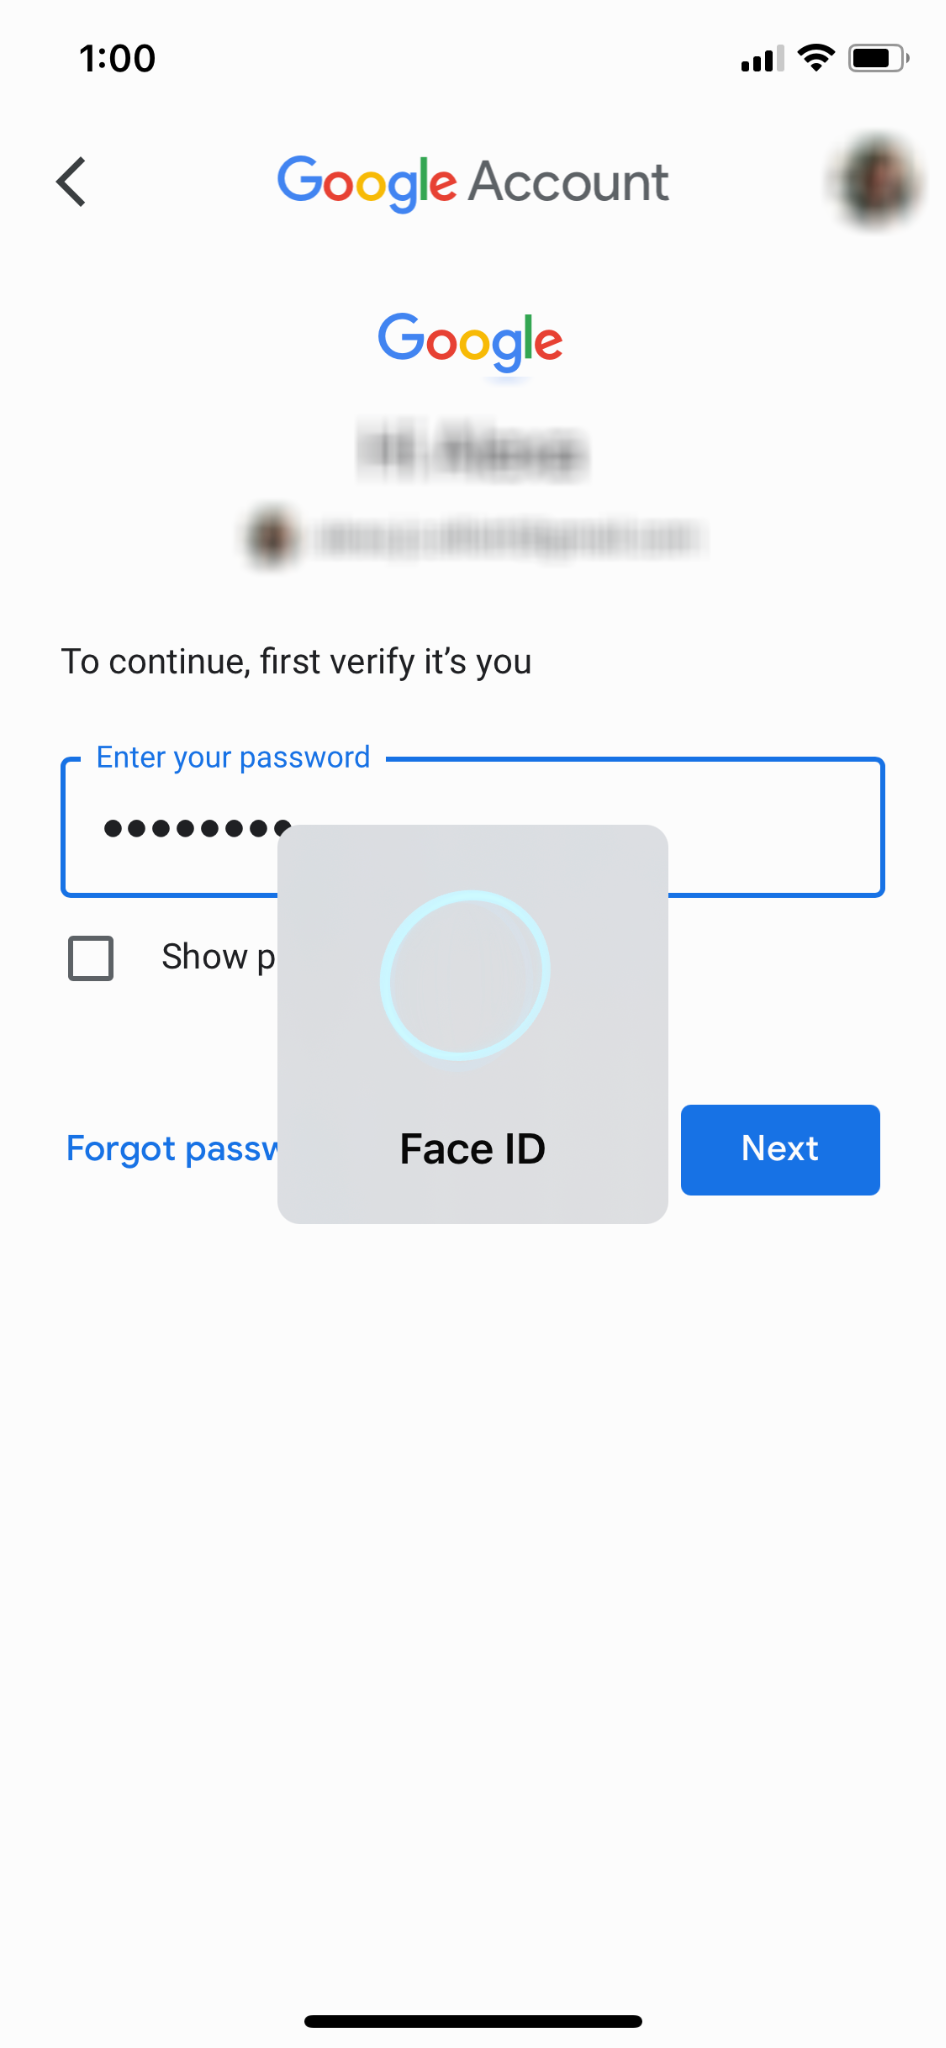 Verify-your-identity-via-password-or-Face-or-Touch-ID